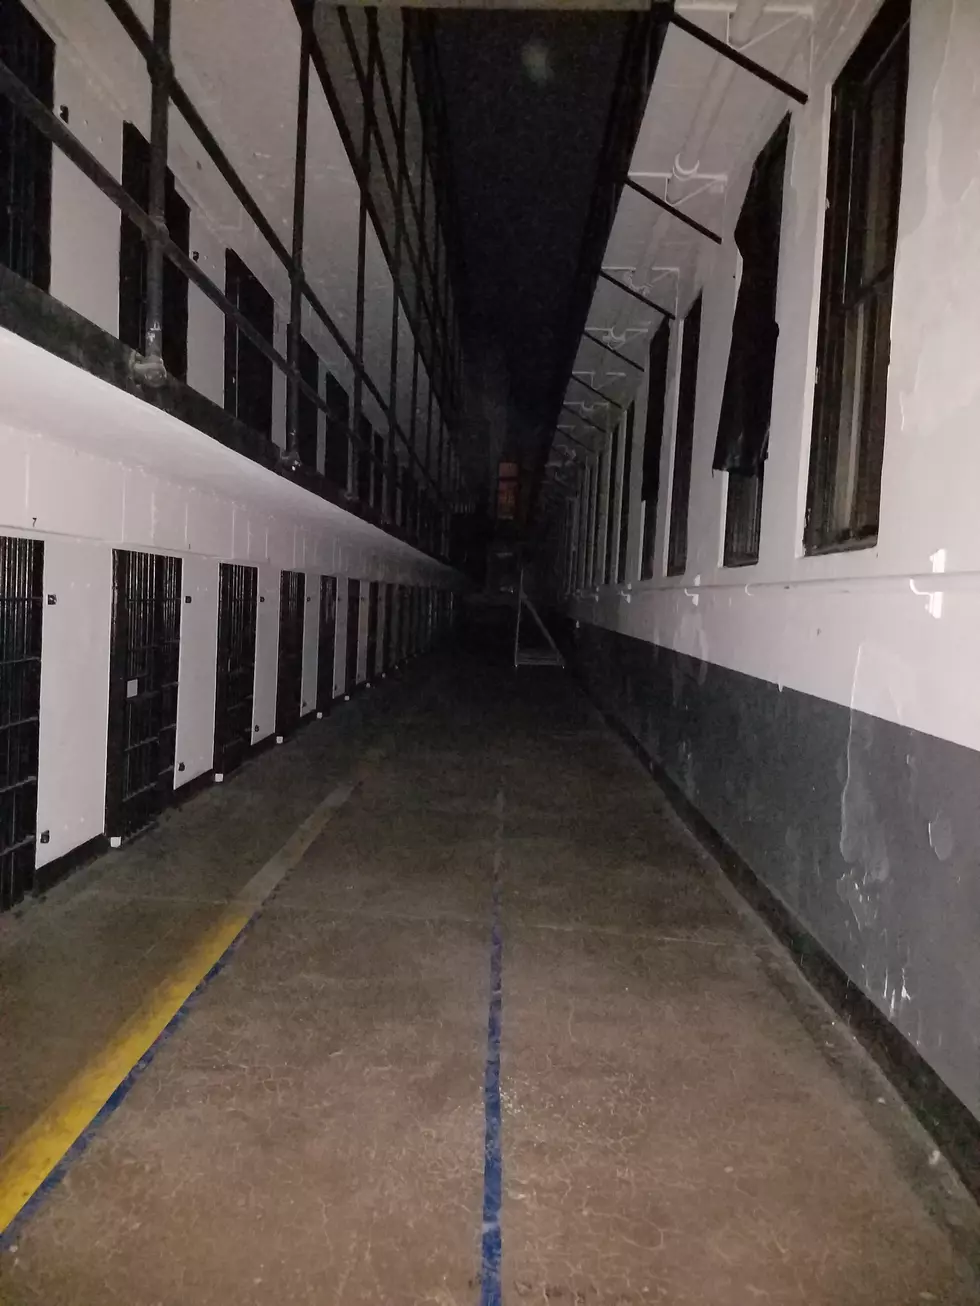 Old Montana Prison Featured on &#8216;Destination FEAR&#8217; [WATCH]